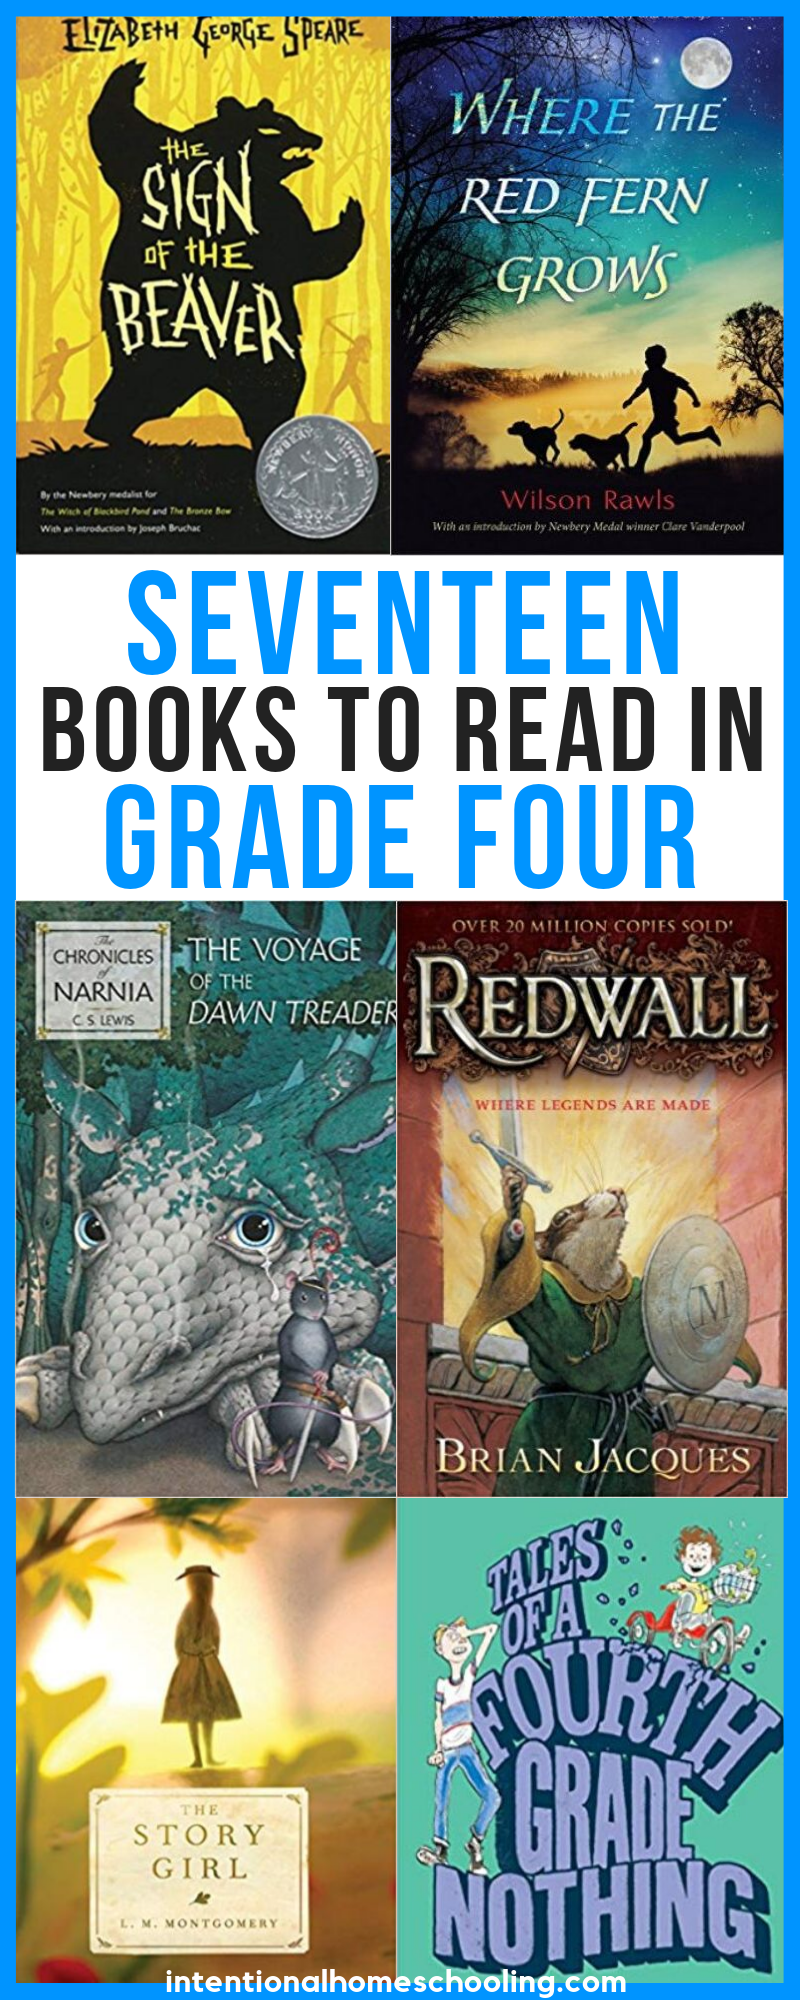 17 Independent Reads for Grade Four - Great Books to Read in Grade Four